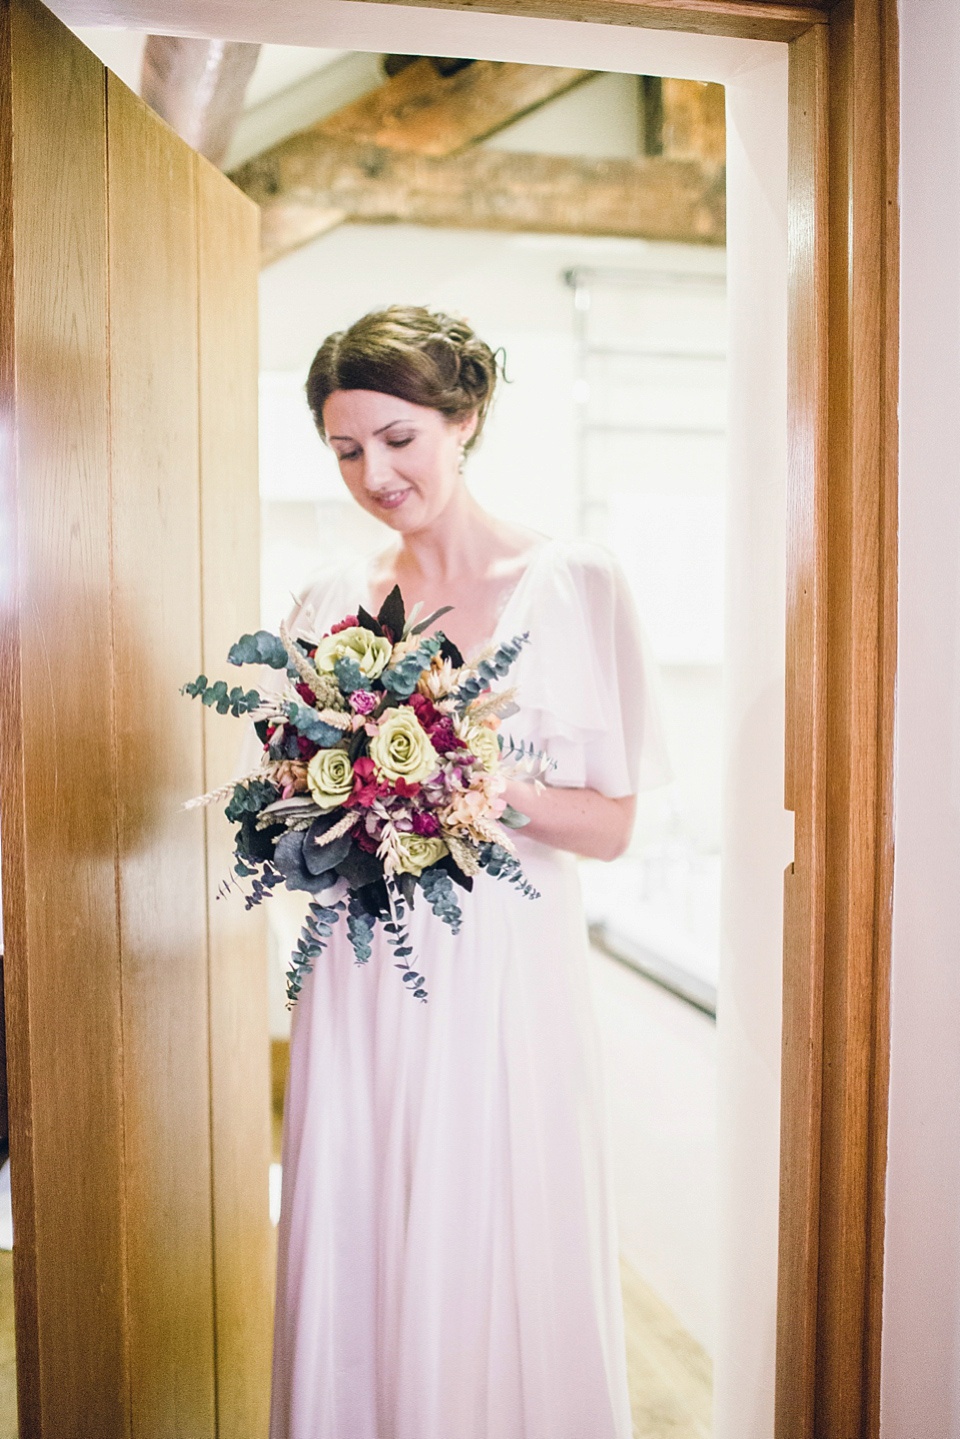 Rebeca wore a Jenny Packham gown for her homemade, Autumn wedding in the Lake District. Photography by Jessica Reeve.